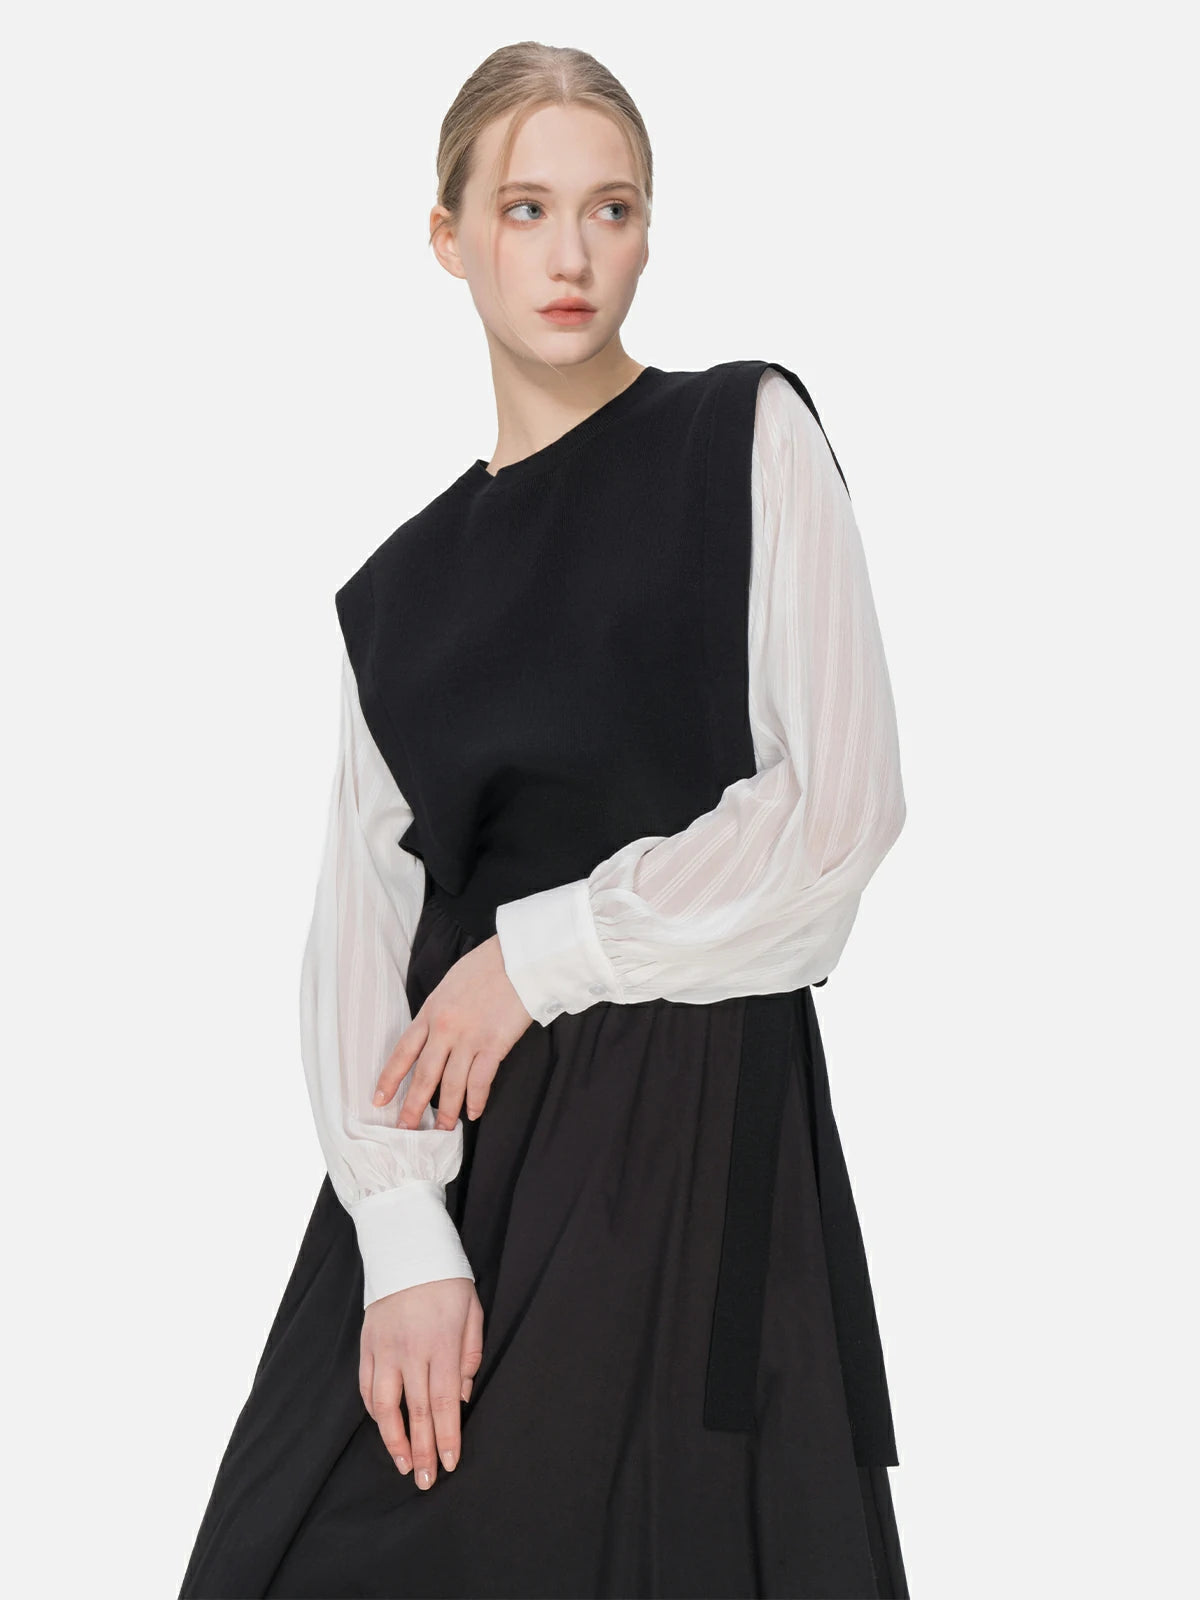 Versatile chic attire: black knitted main body paired with white chiffon sleeves and a side-tie design.